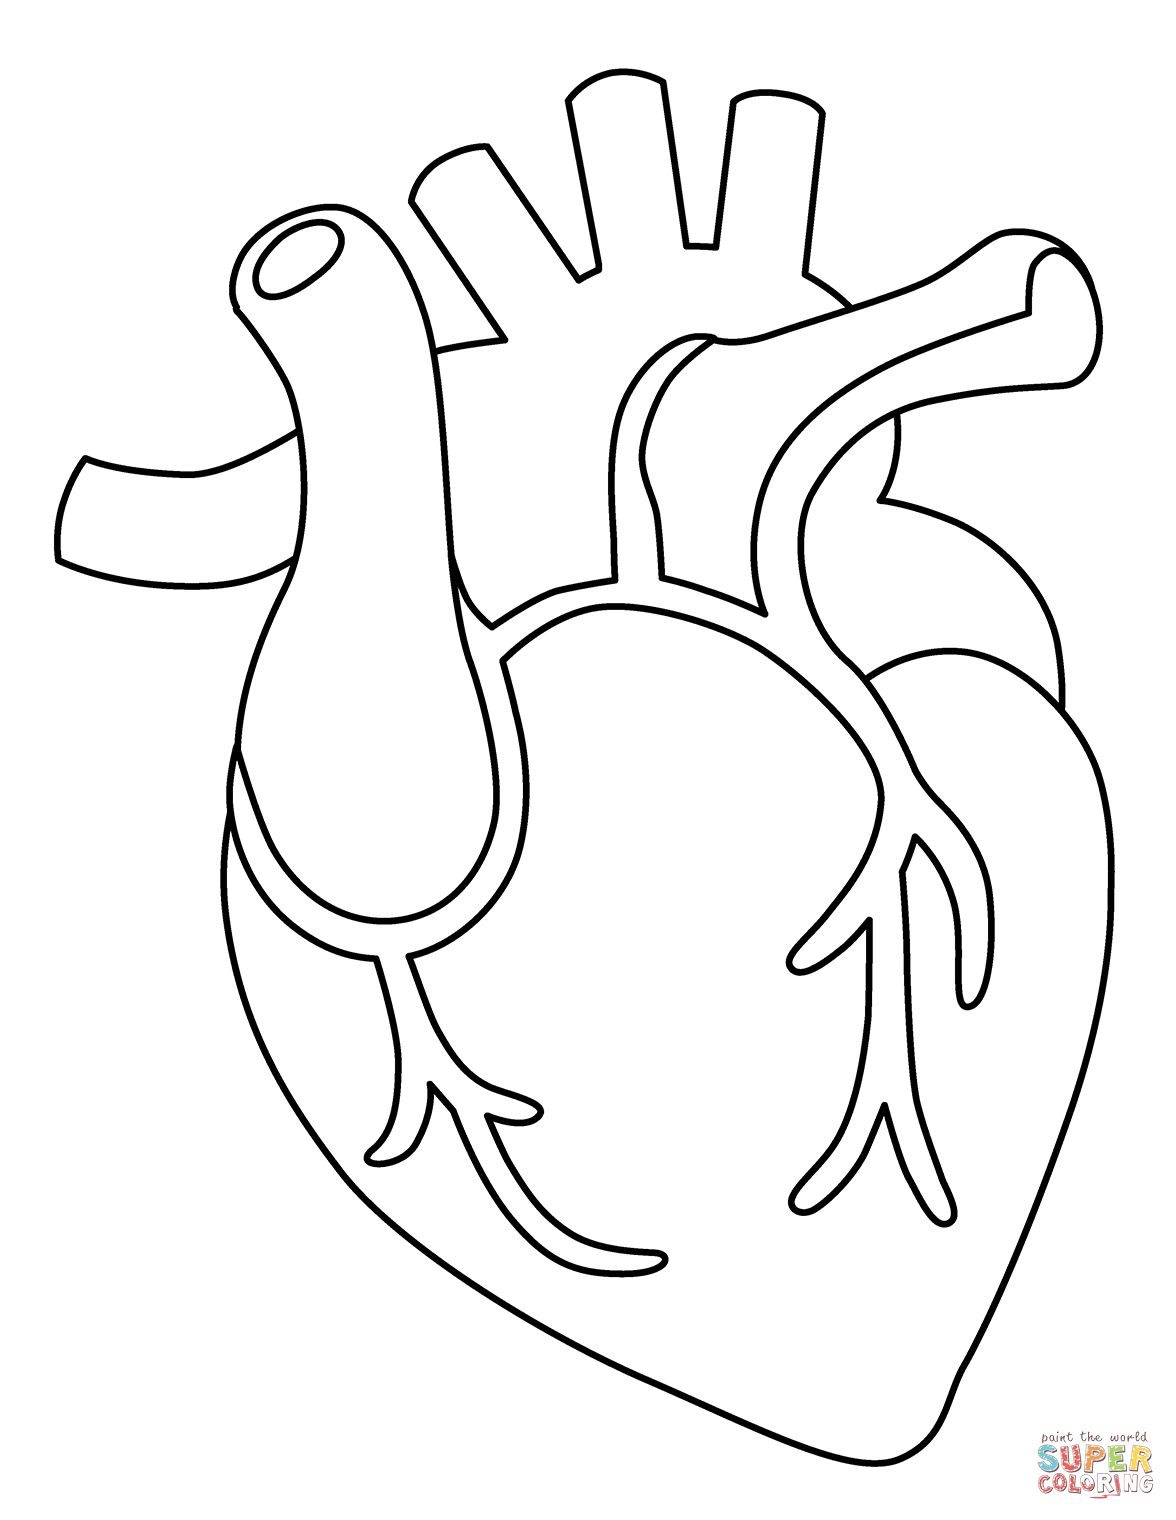 Anatomical Heart Emoji coloring page | Free Printable Coloring Pages